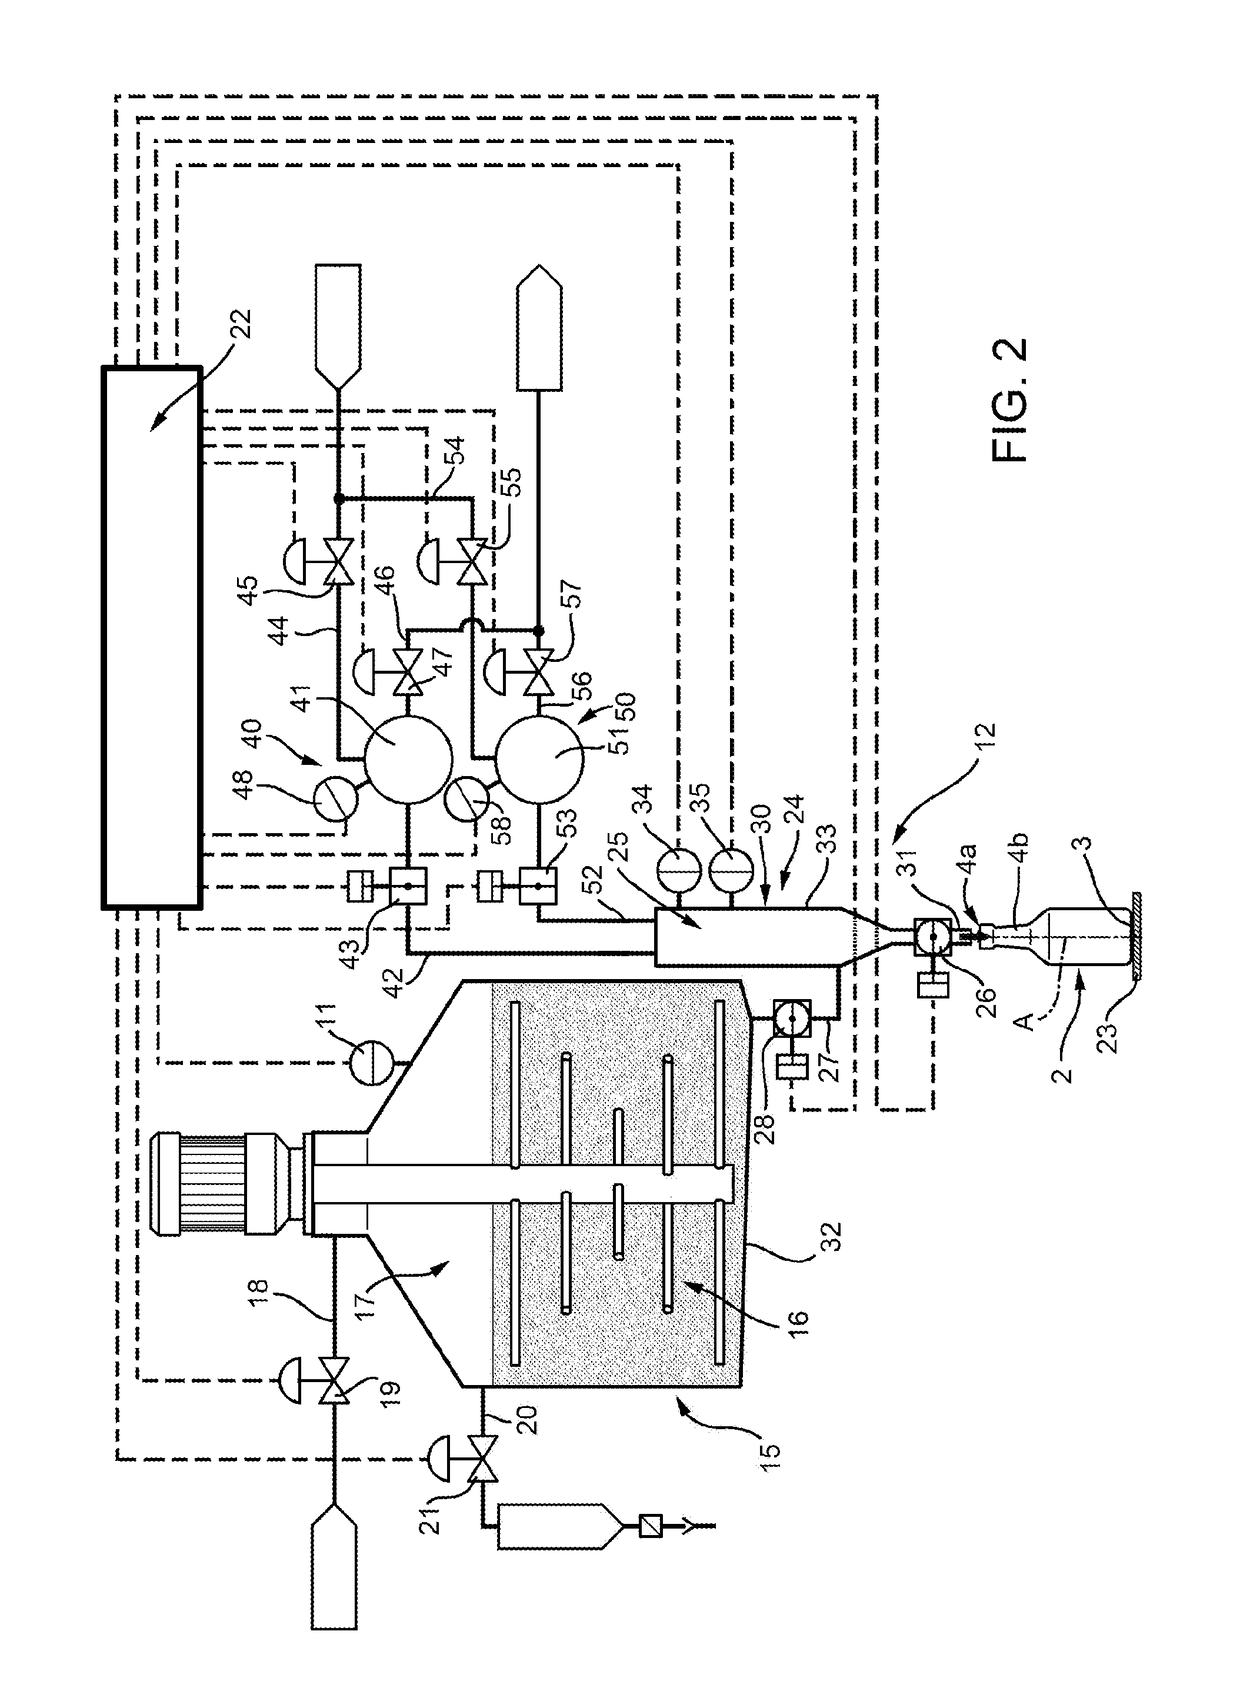 Machine and method for filling containers with pourable product